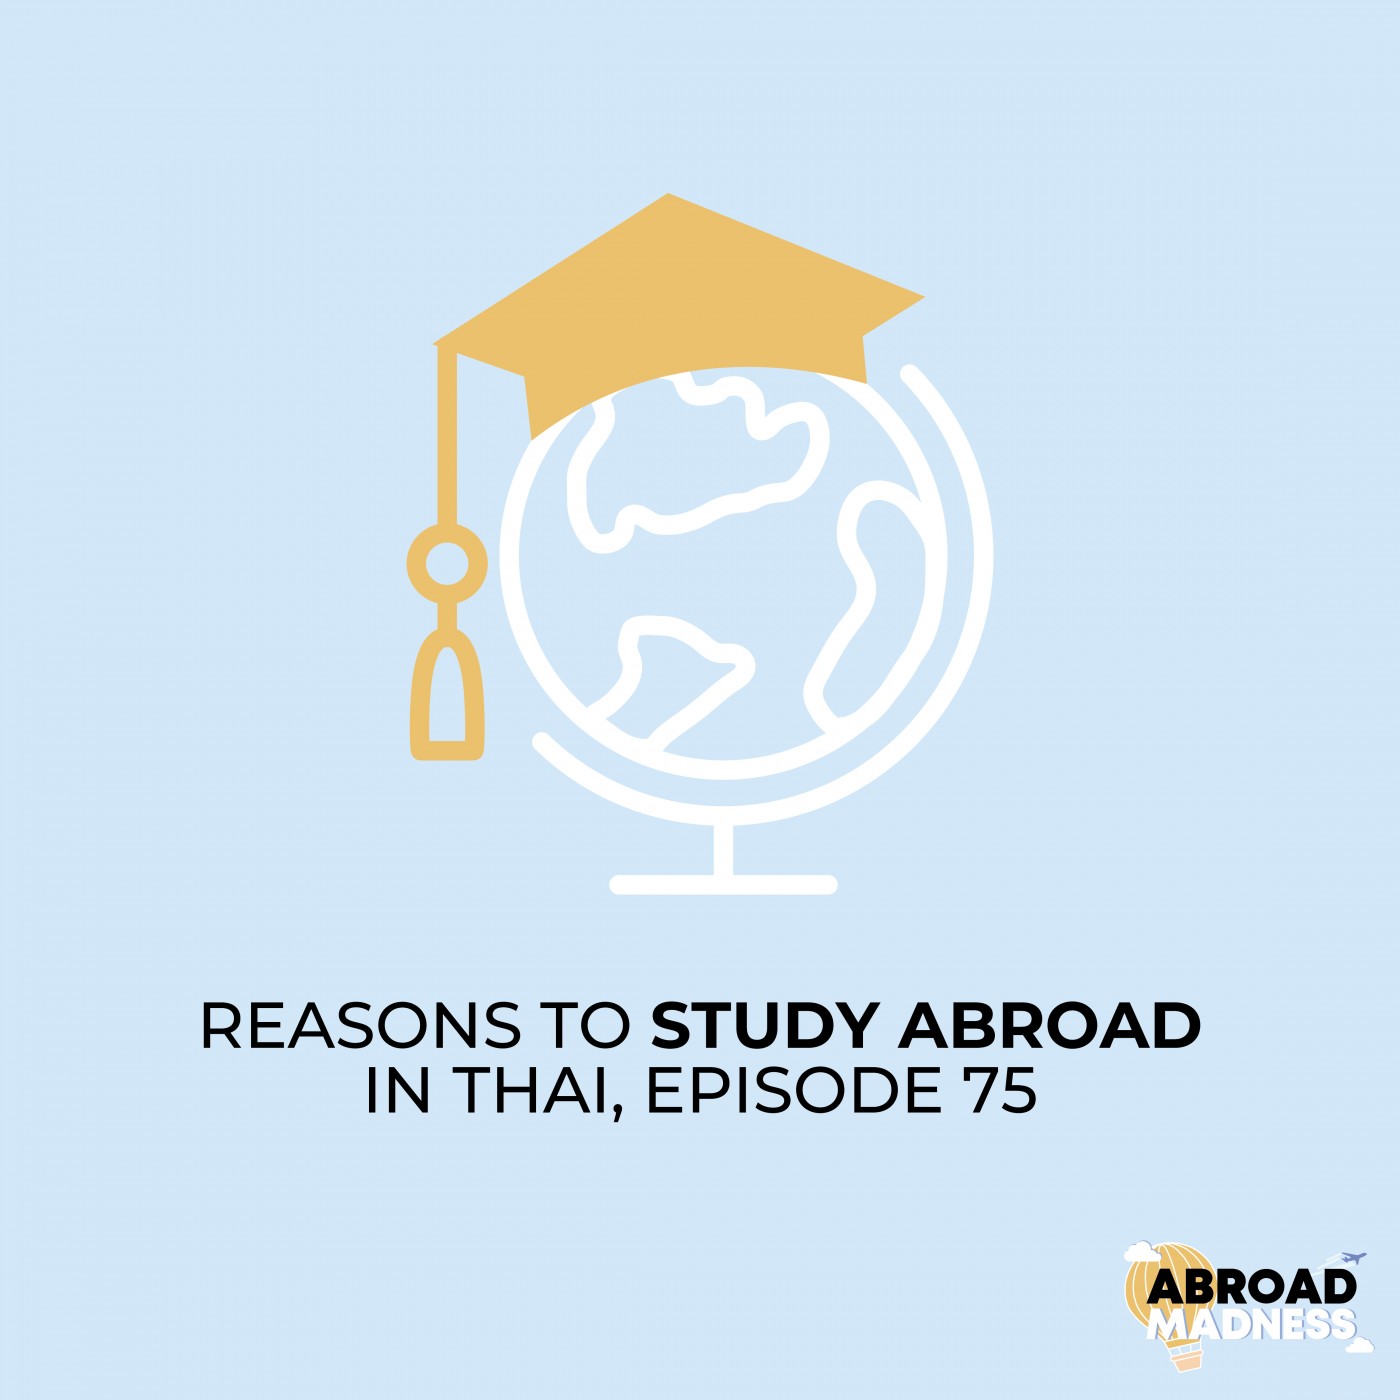 Reasons to study abroad in Thai, Episode 75